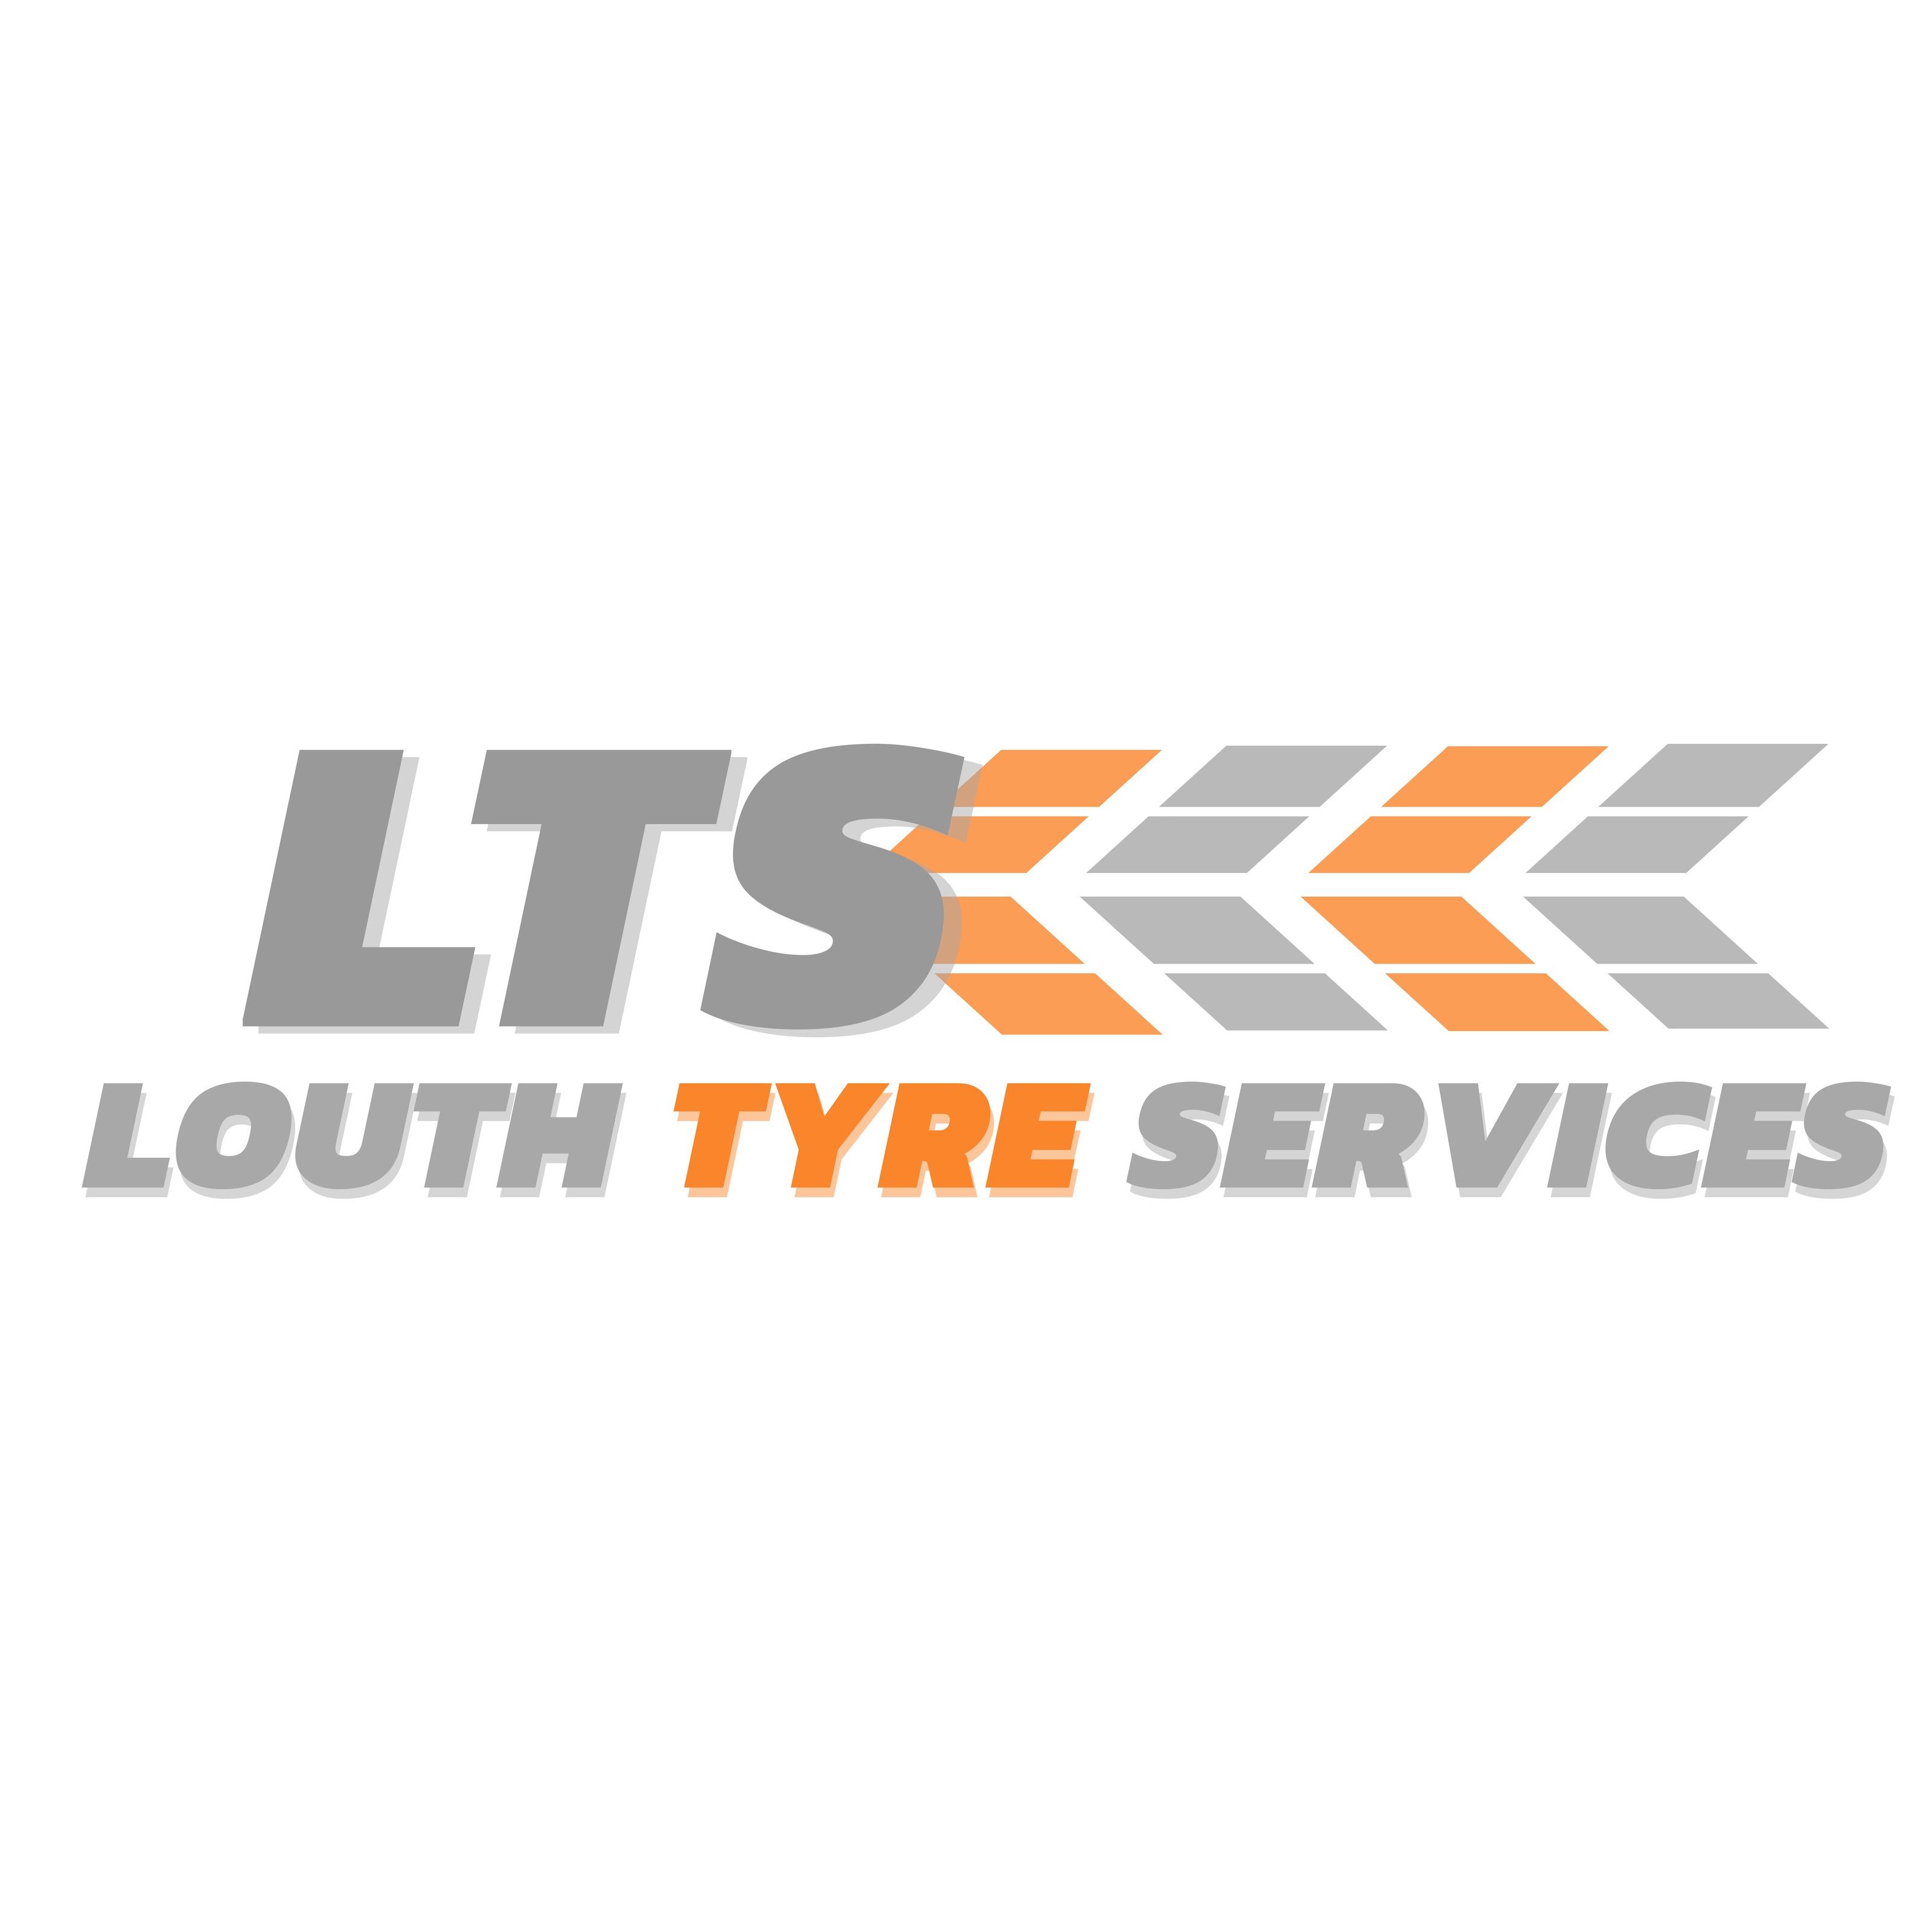 Louth Tyres Logo Louth Tyre Services Ltd Louth 01507 355715